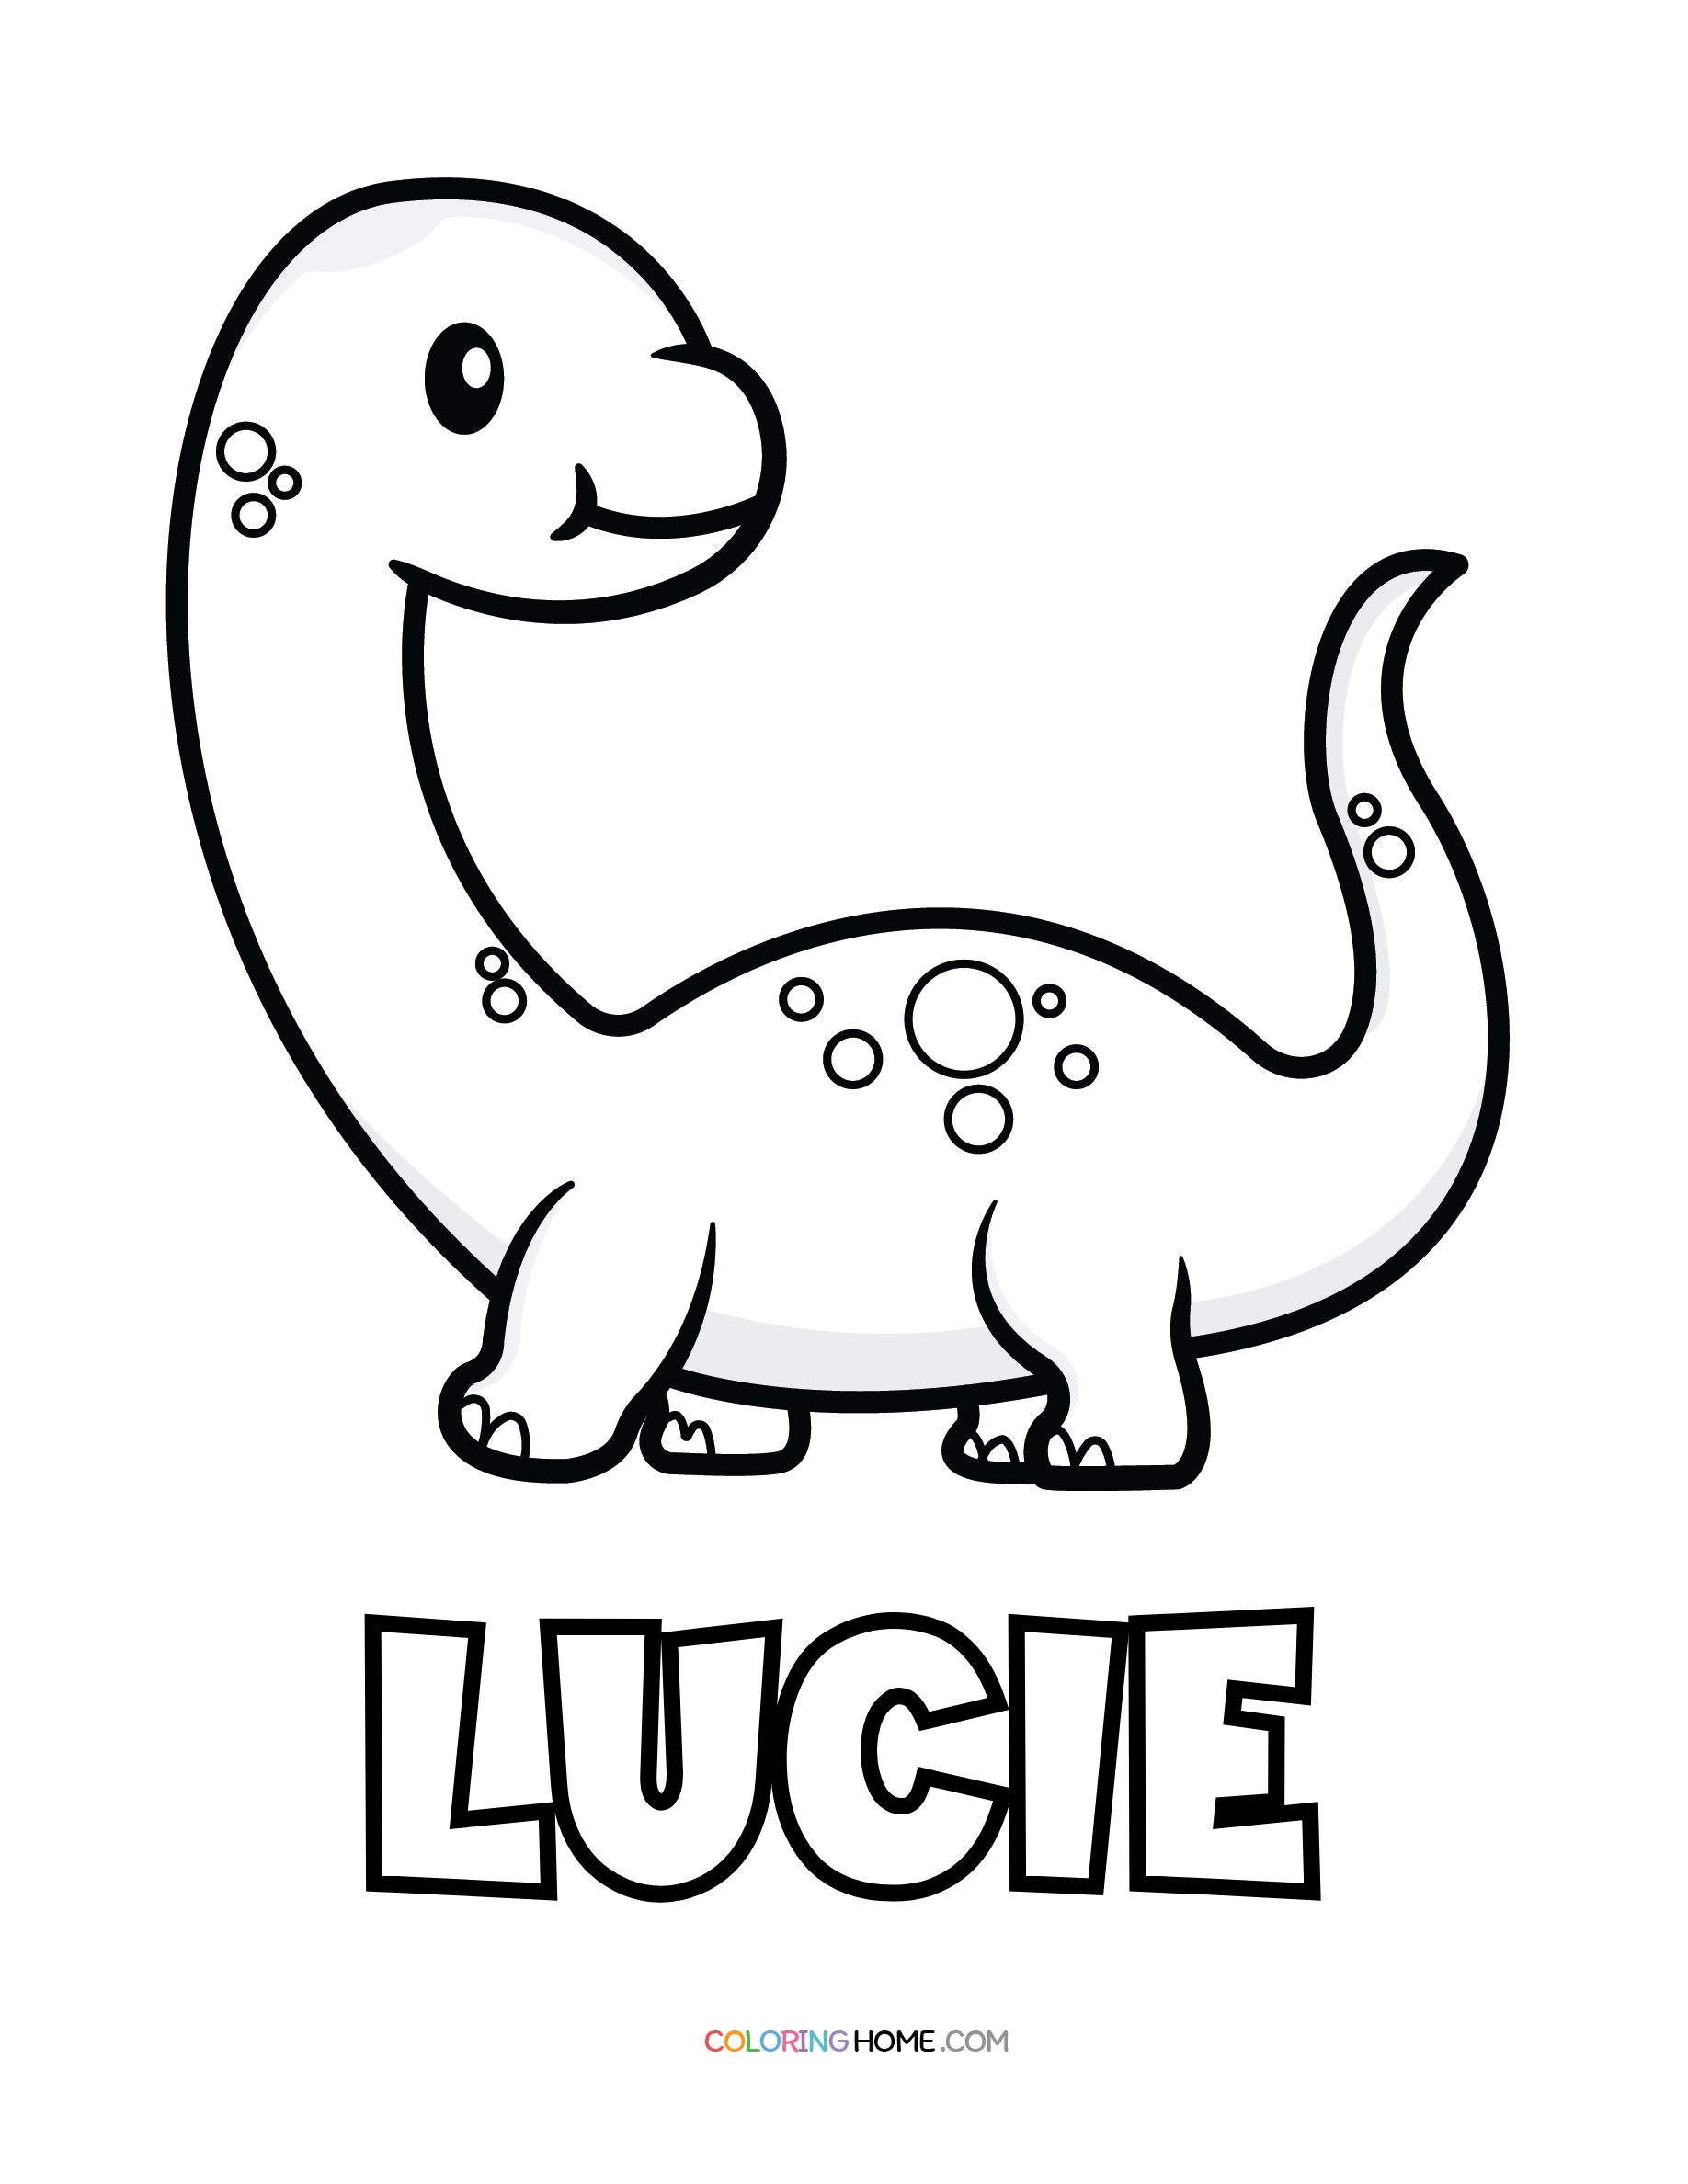 Lucie dinosaur coloring page